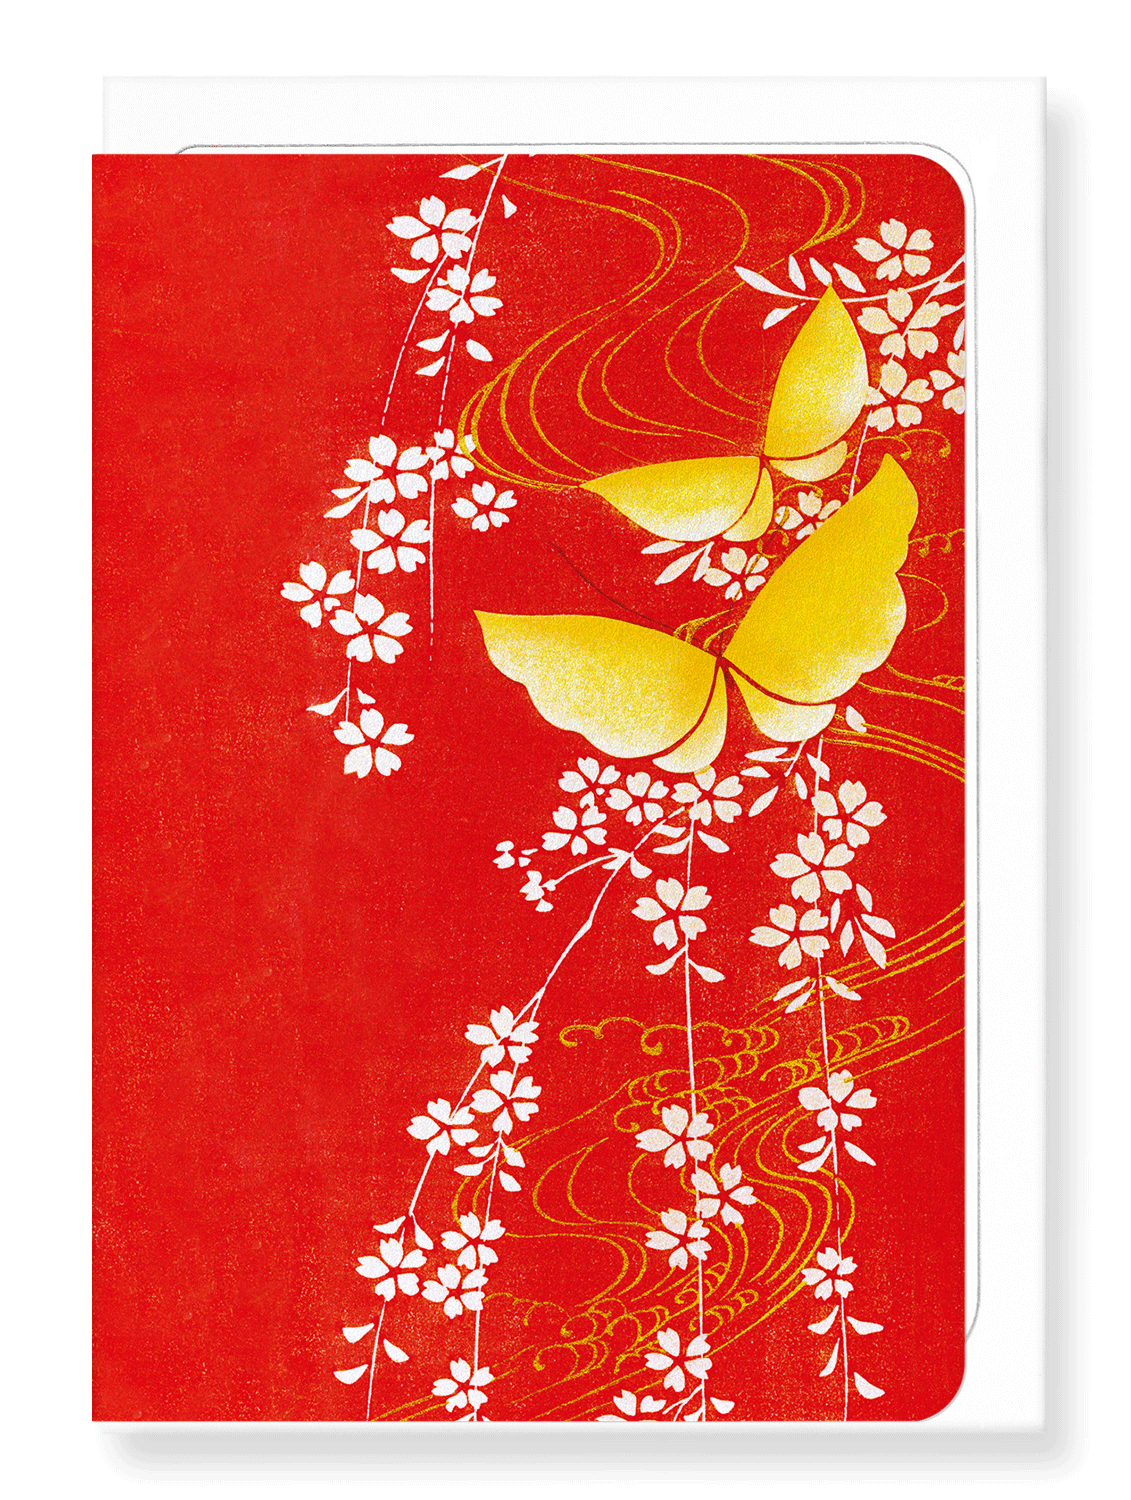 Ezen Designs - Butterflies and cherry blossoms - Greeting Card - Front